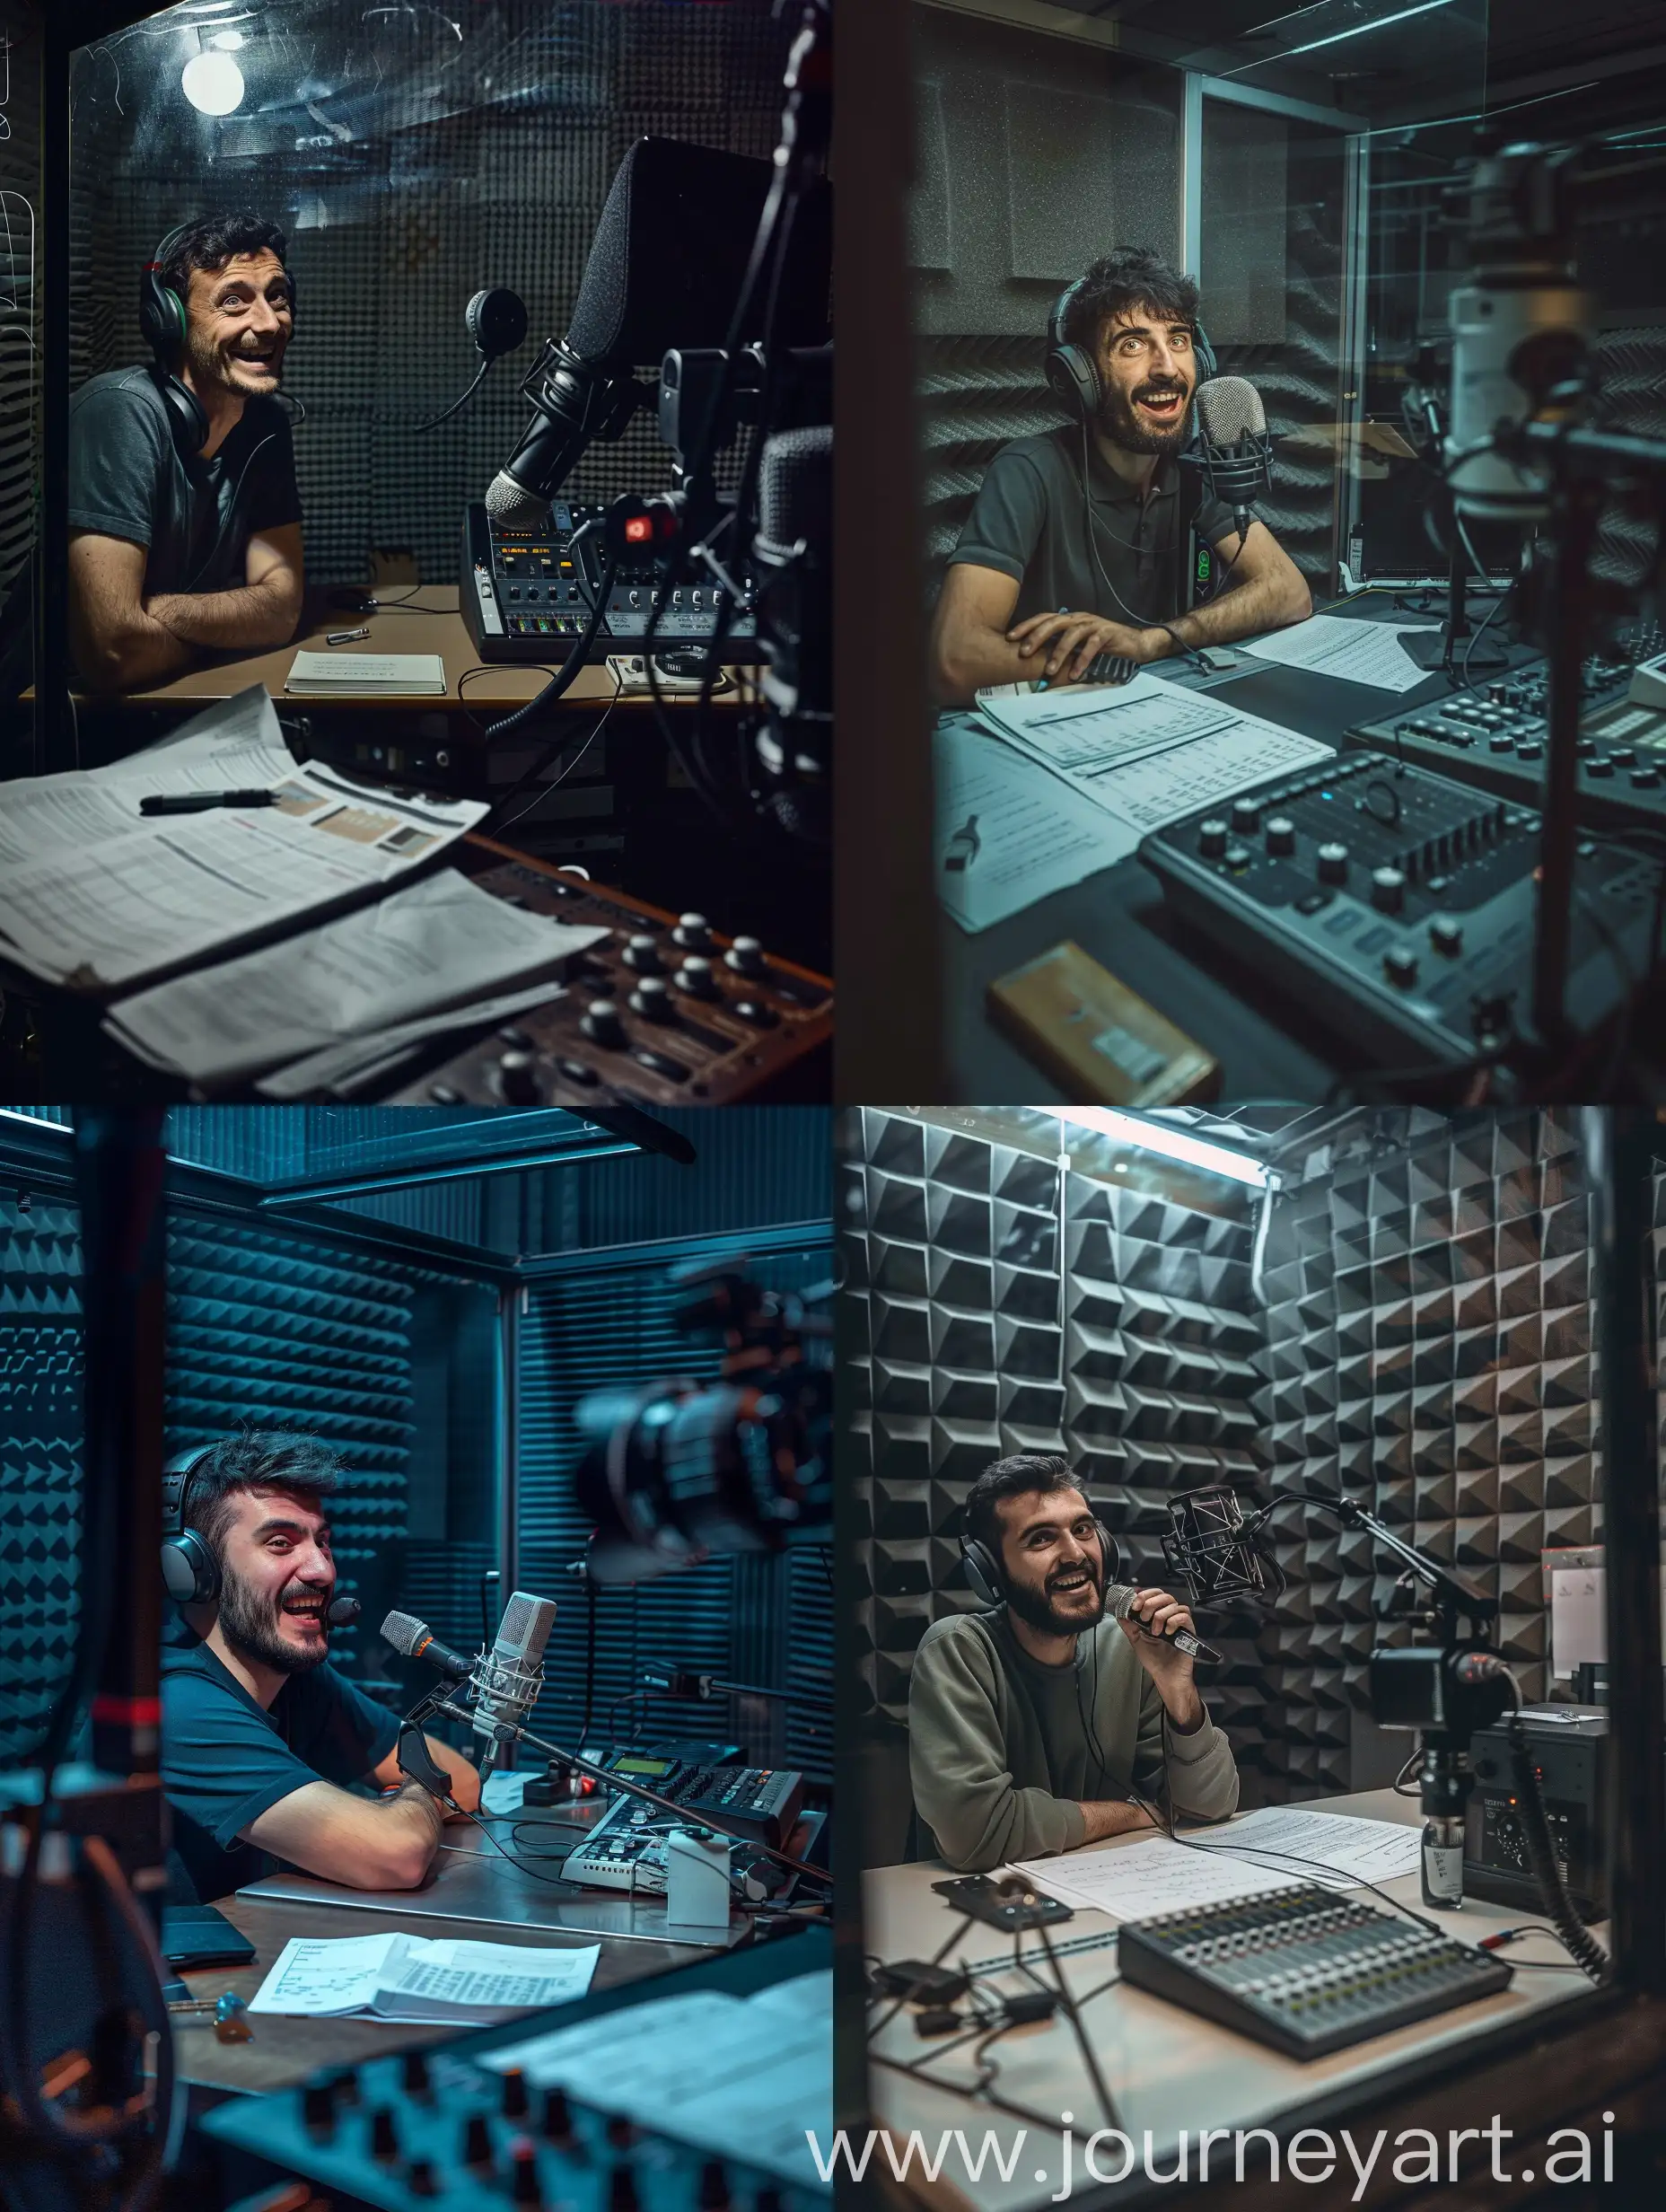 A 26 year old male Italian radio speaker speaks into the microphone, in his small radio broadcast room. The room is very small and empty and the walls are covered in sound-absorbing material. The speaker has an amused face, is wearing a pair of headphones and has his arms resting on the table. Next to him there are some sheets of notes and a small audio mixer. In front of him there is a large glass window that divides the room from the control room. The speaker looks to the side, slightly down, straight at the lens positioned next to him. The photo is in color with a dark atmosphere